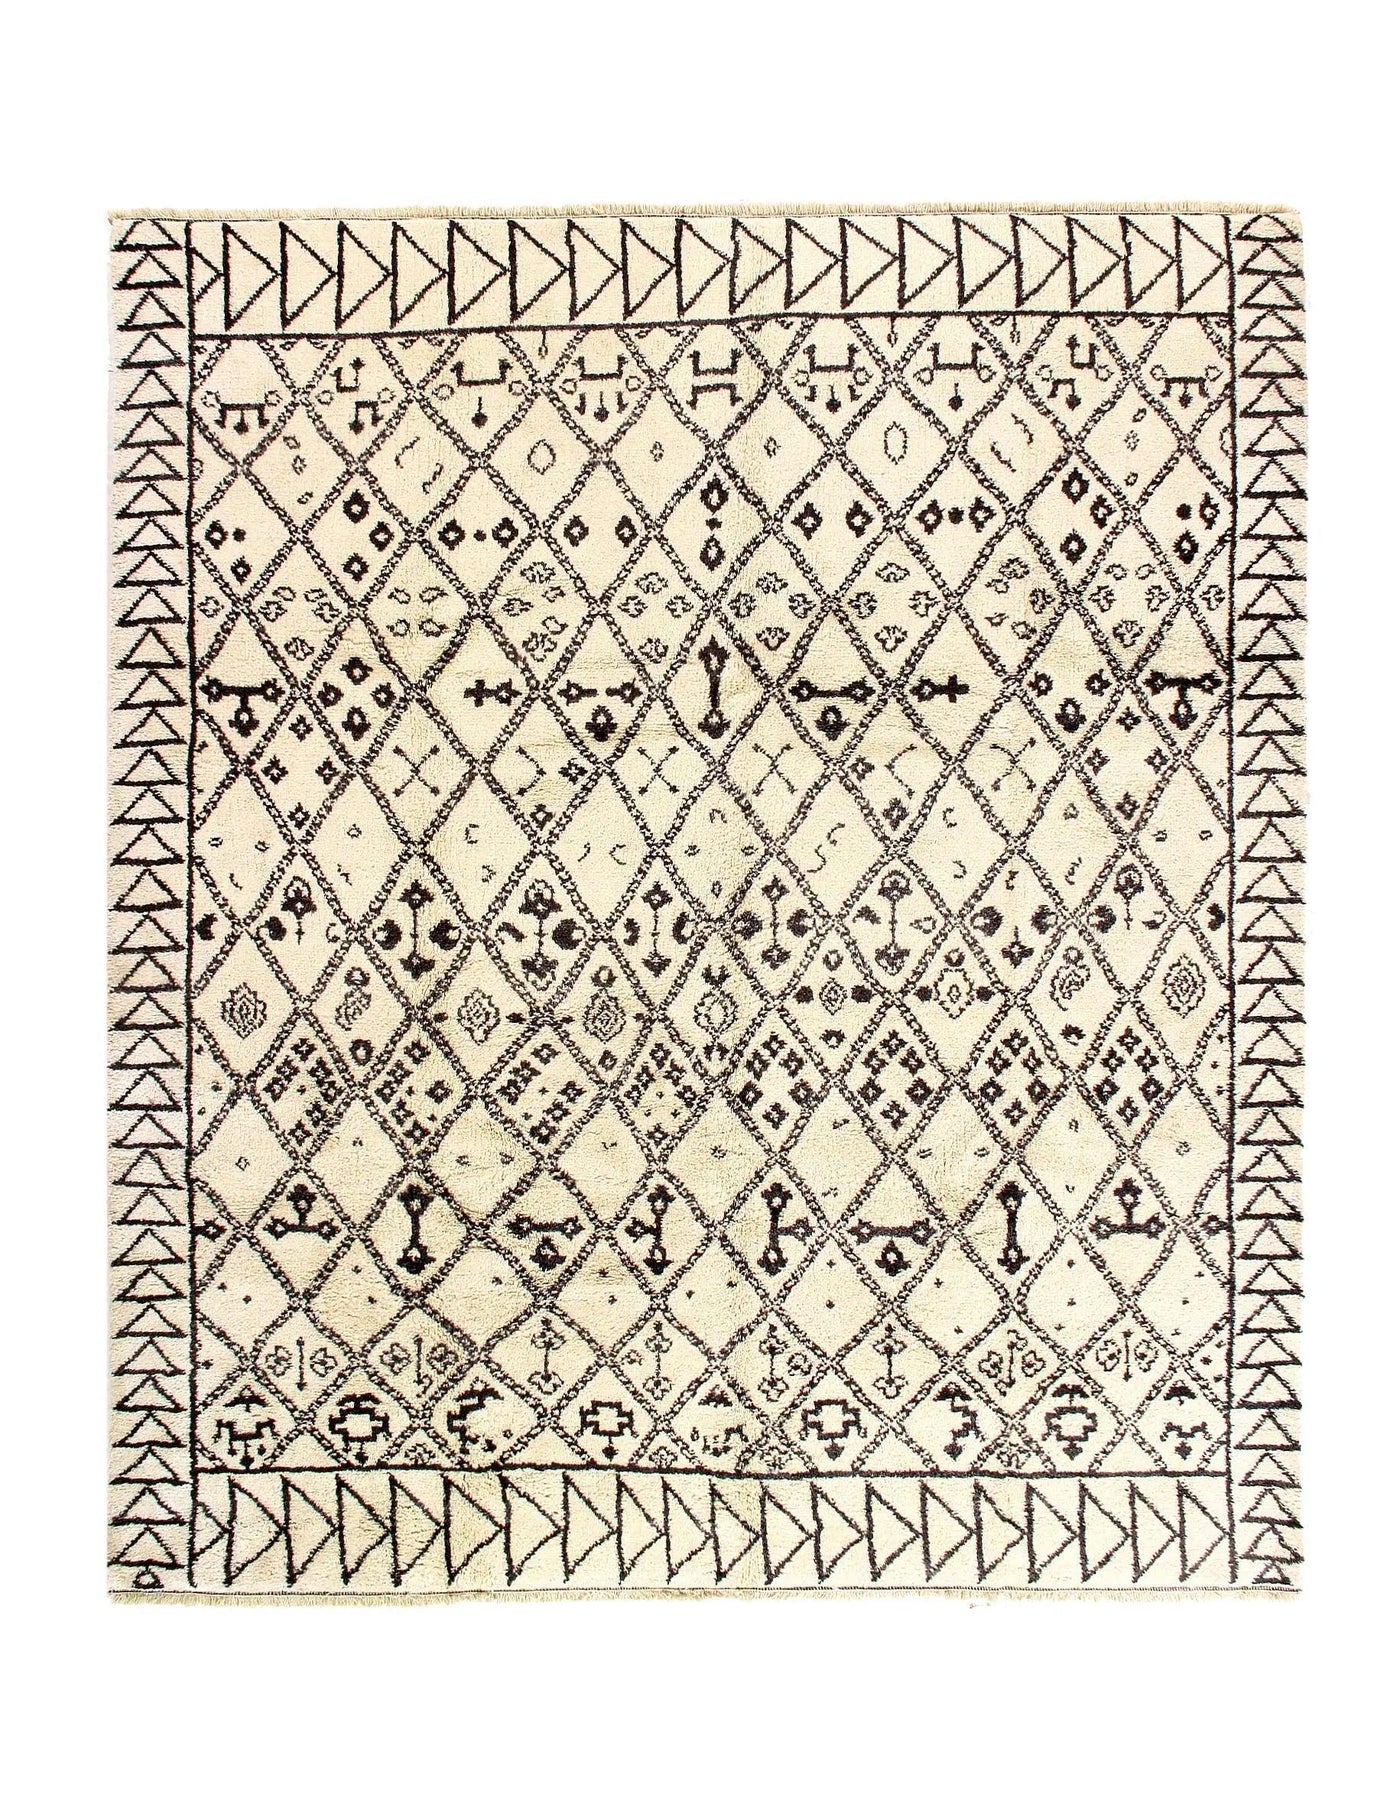 Moroccan Design Hand-Knotted Rug - 8'1" x 10'